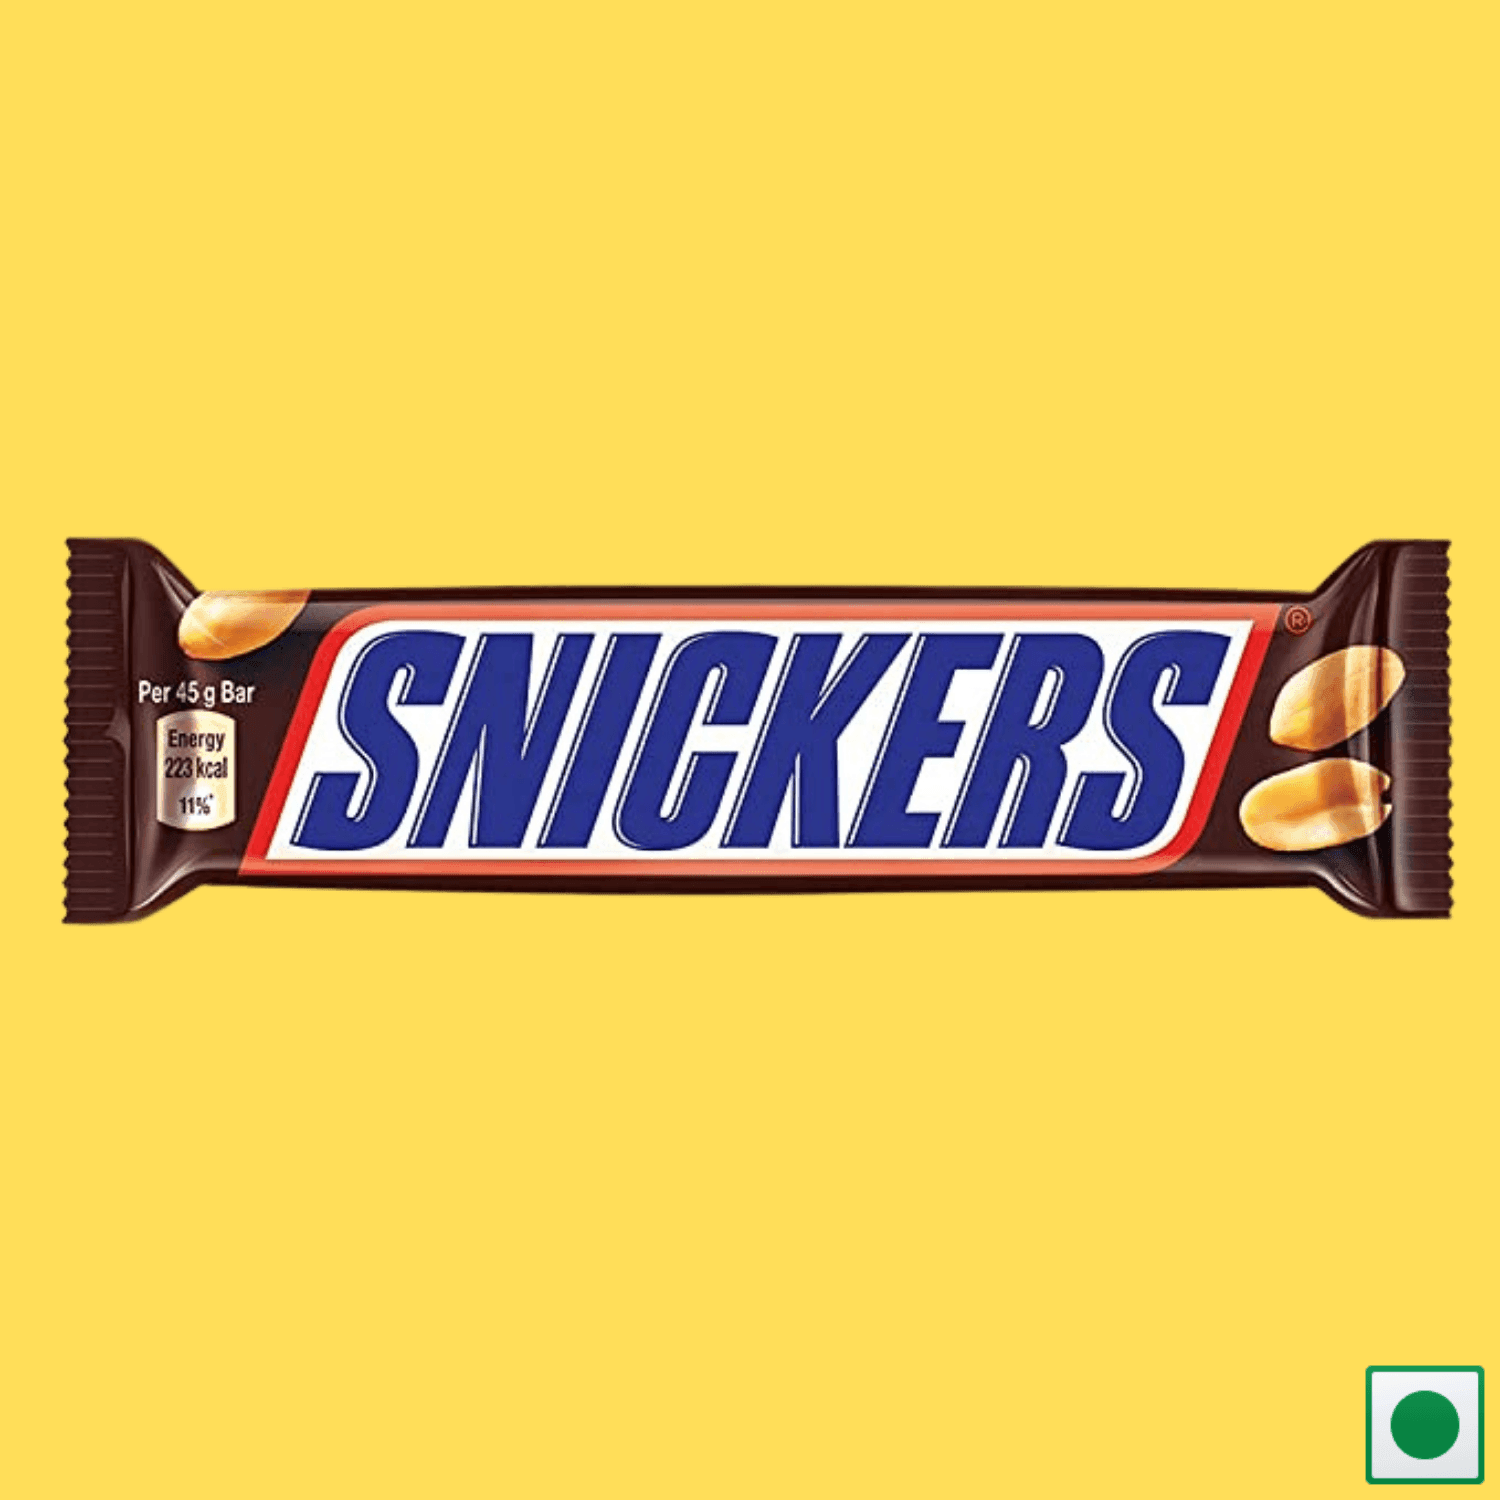 Snickers Chocolate - Online Grocery Shopping and Delivery in Bangladesh |  Buy fresh food items, personal care, baby products and more